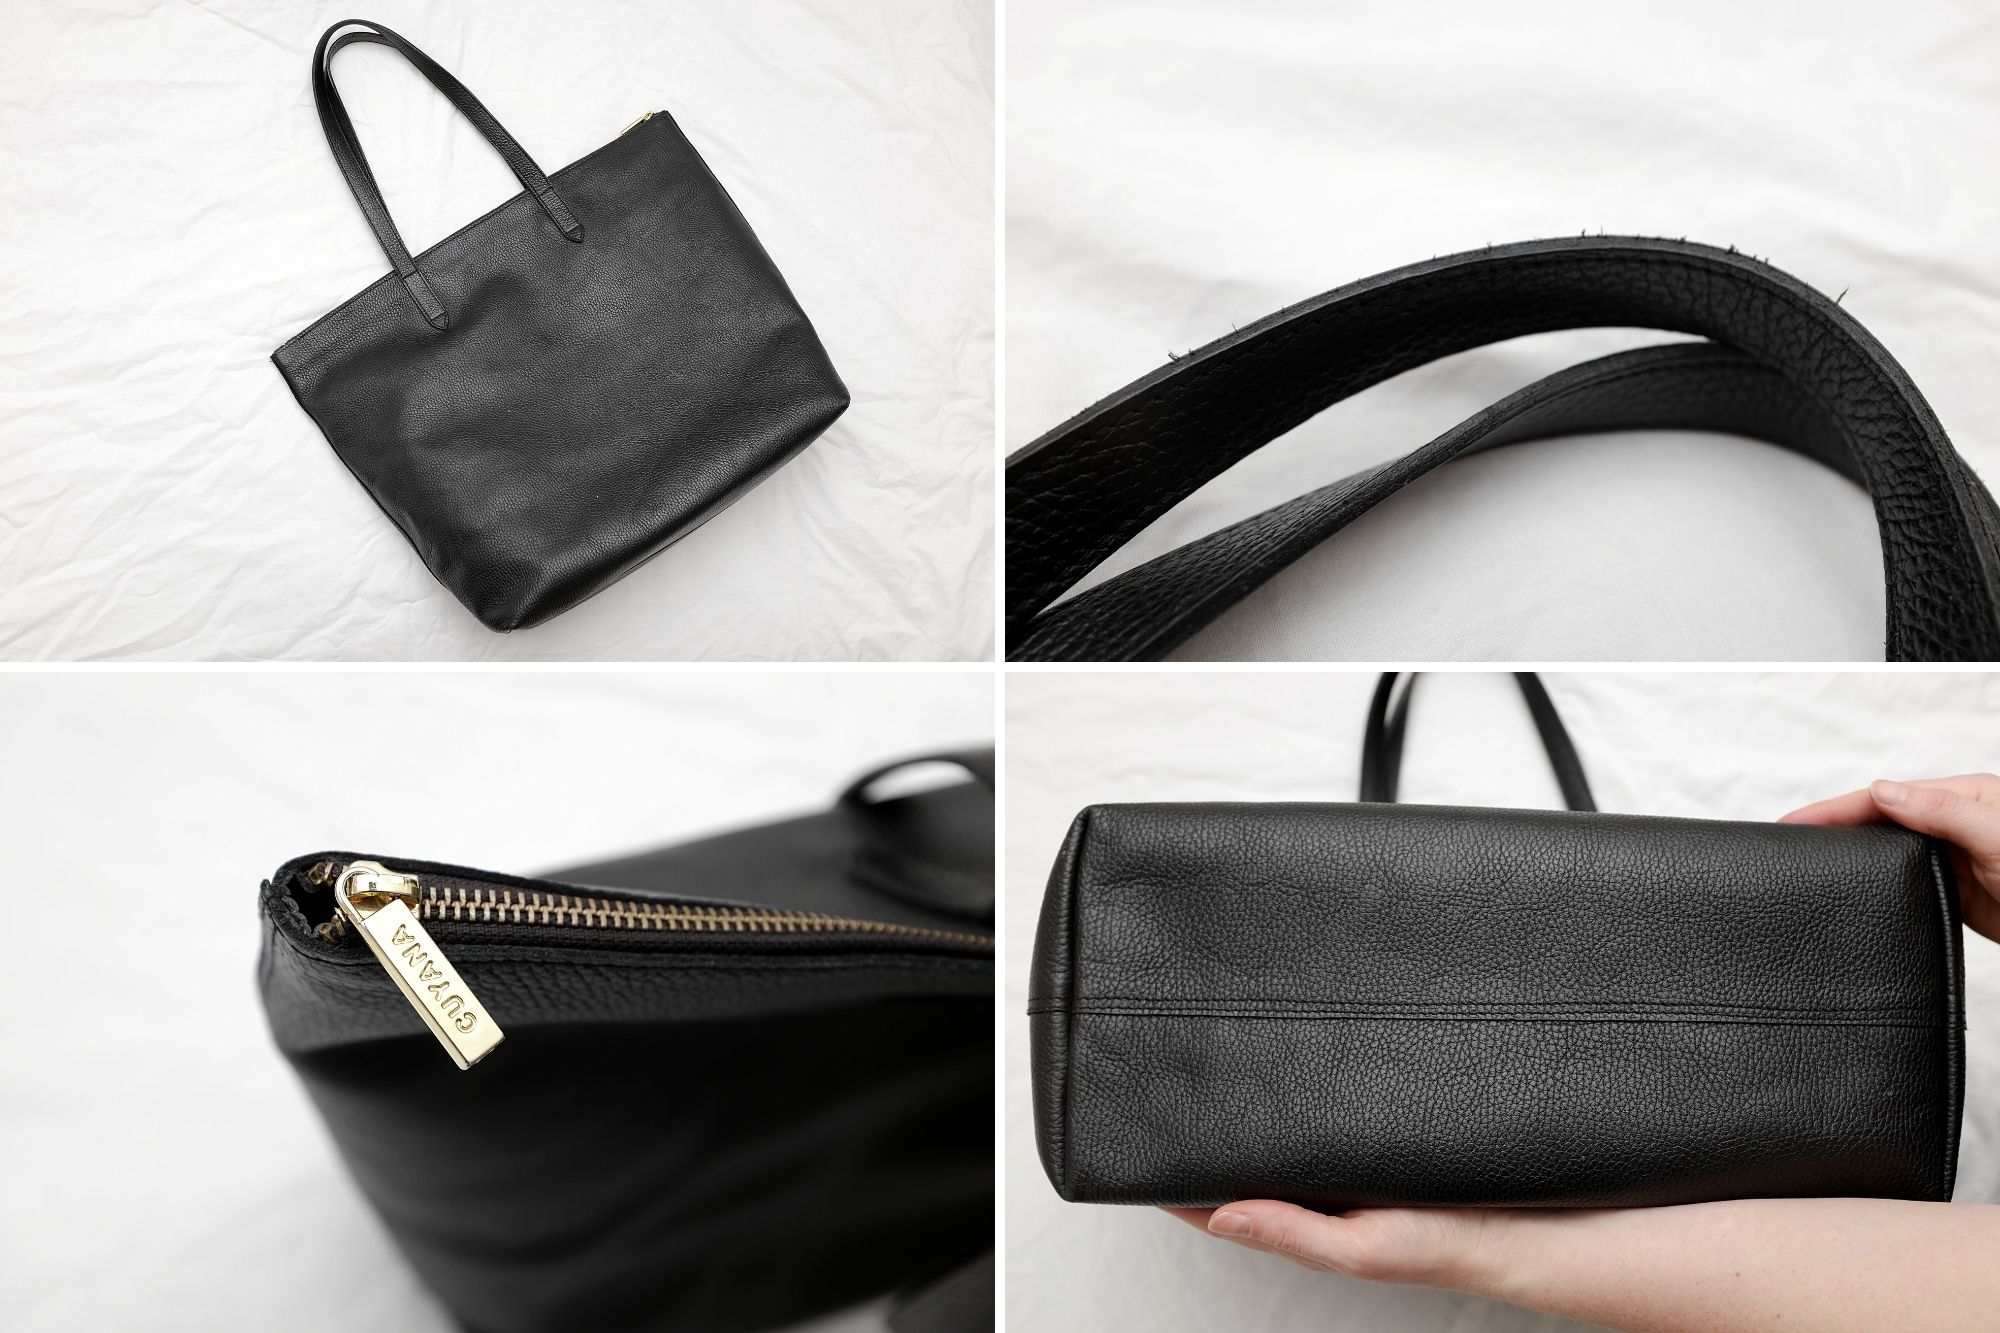 Cuyana Easy Tote Editor Review